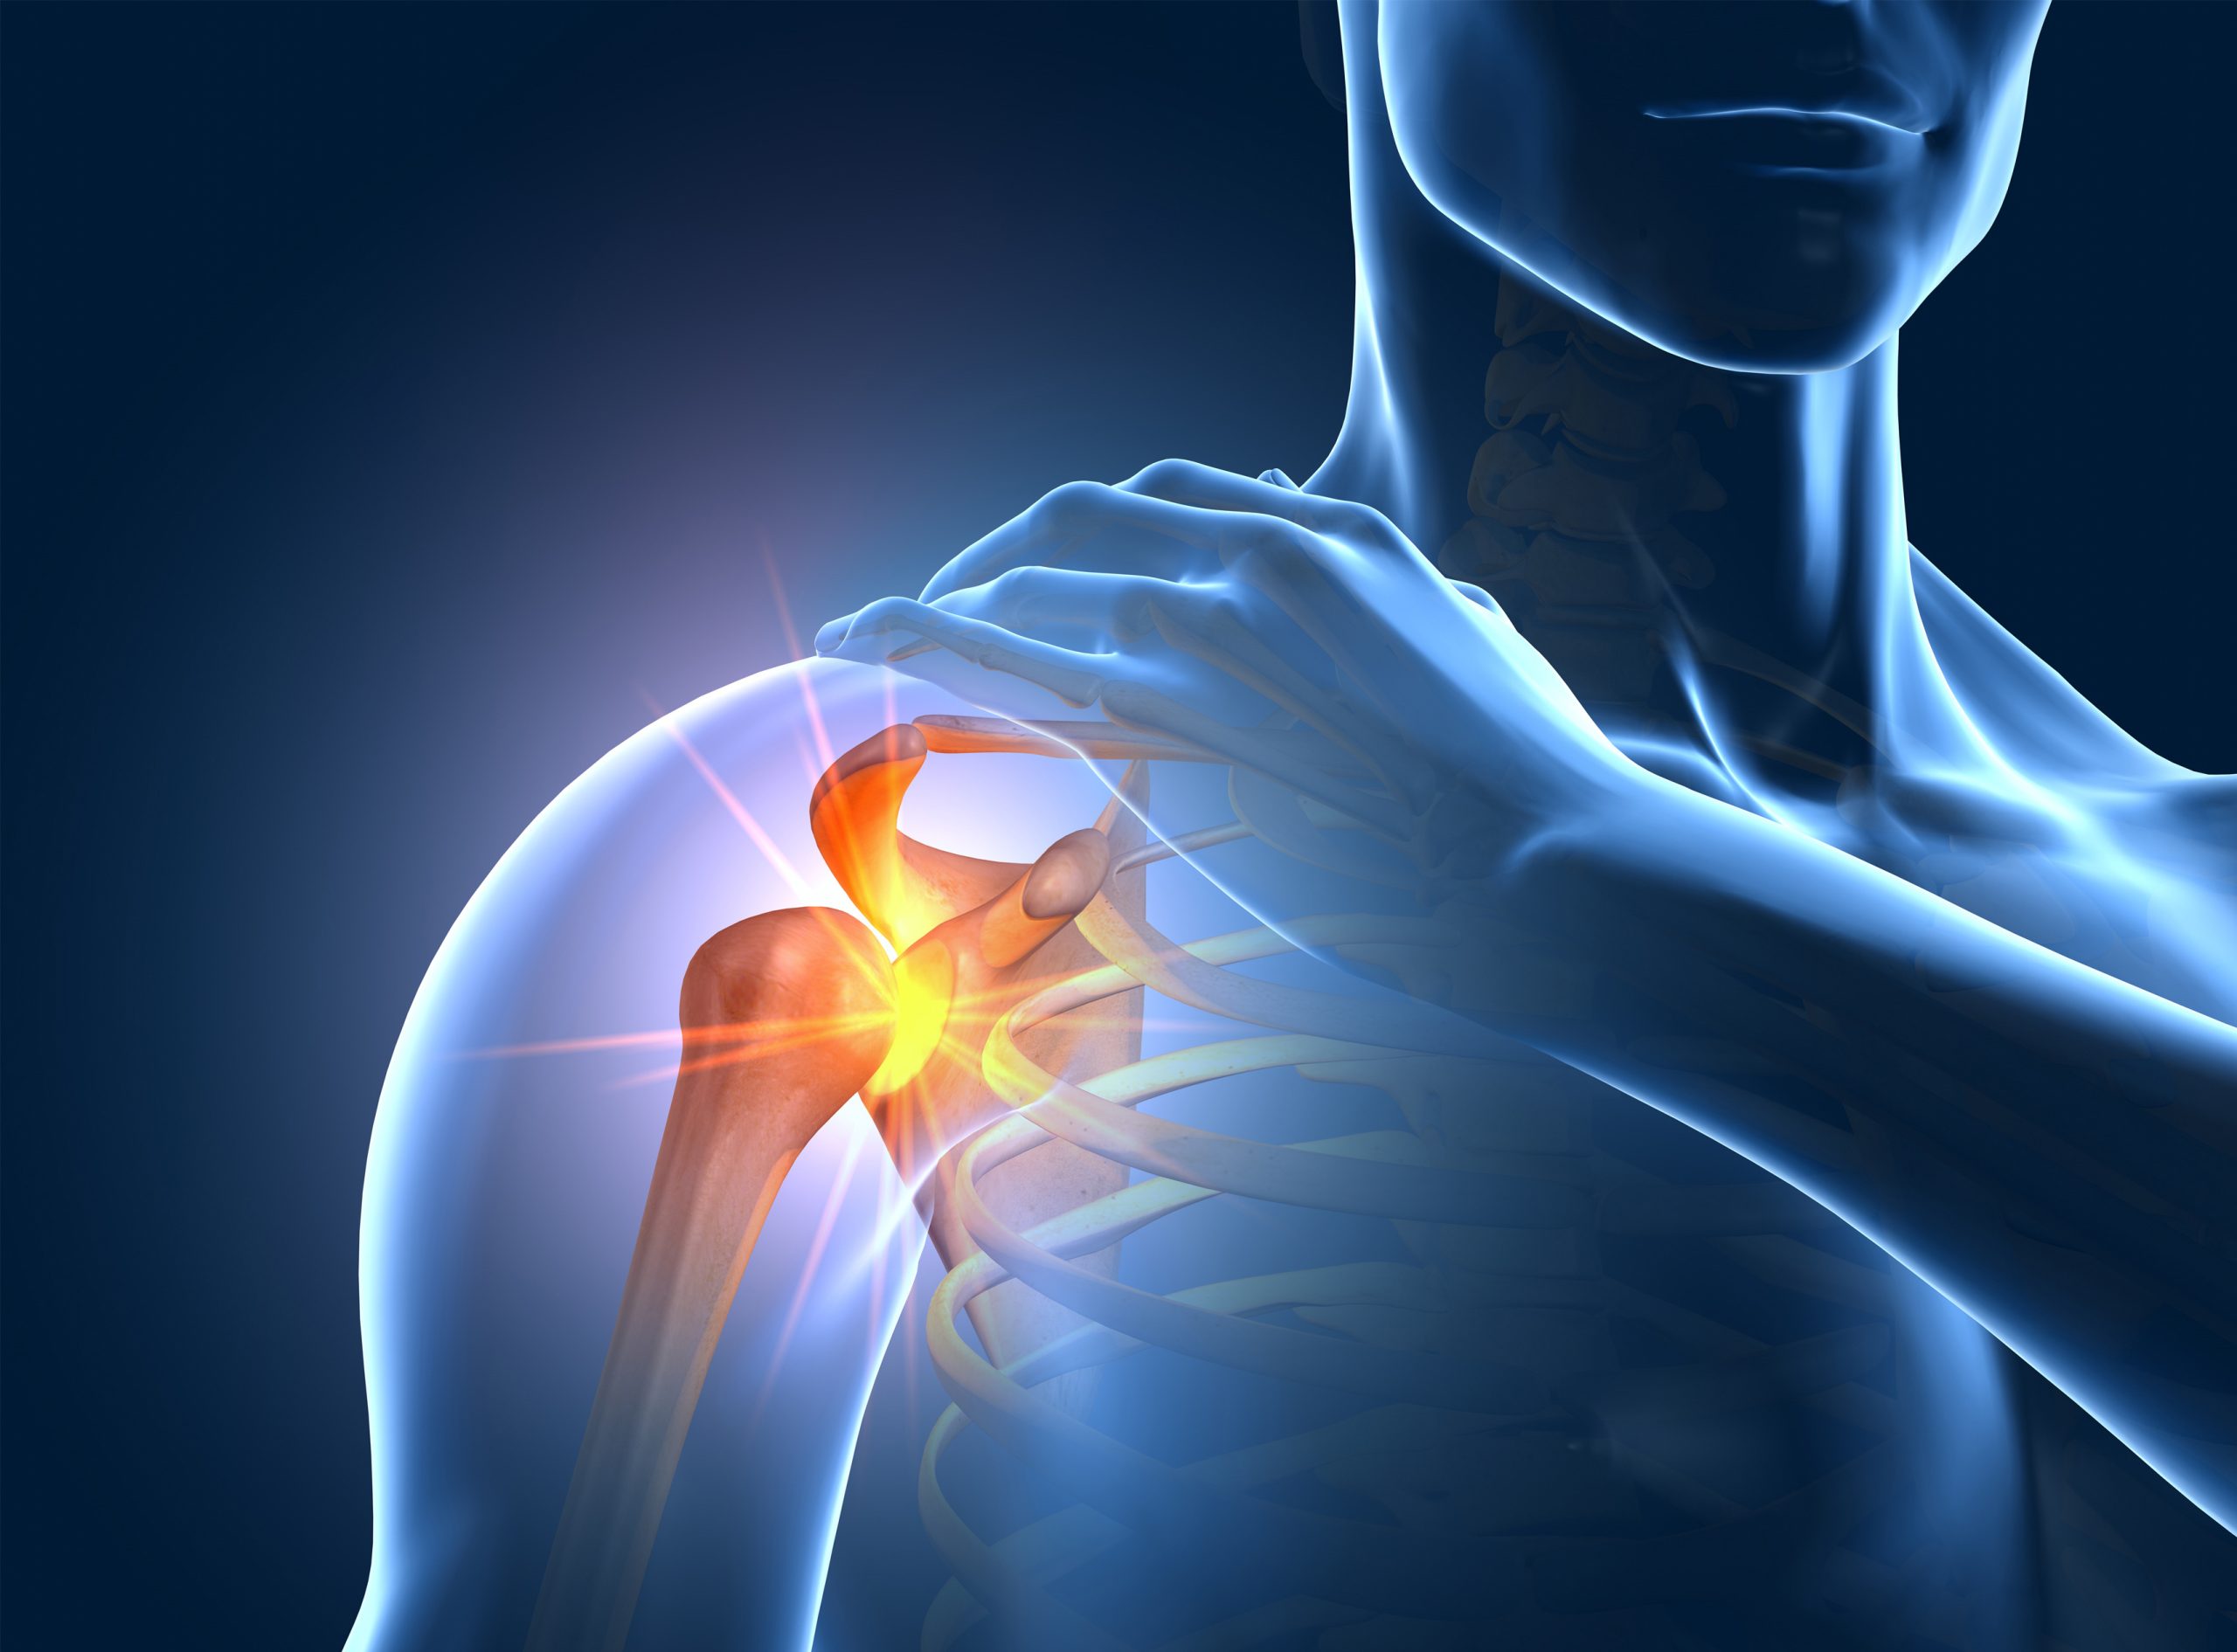 shoulder joint - the source of pain in arthritis of the shoulder